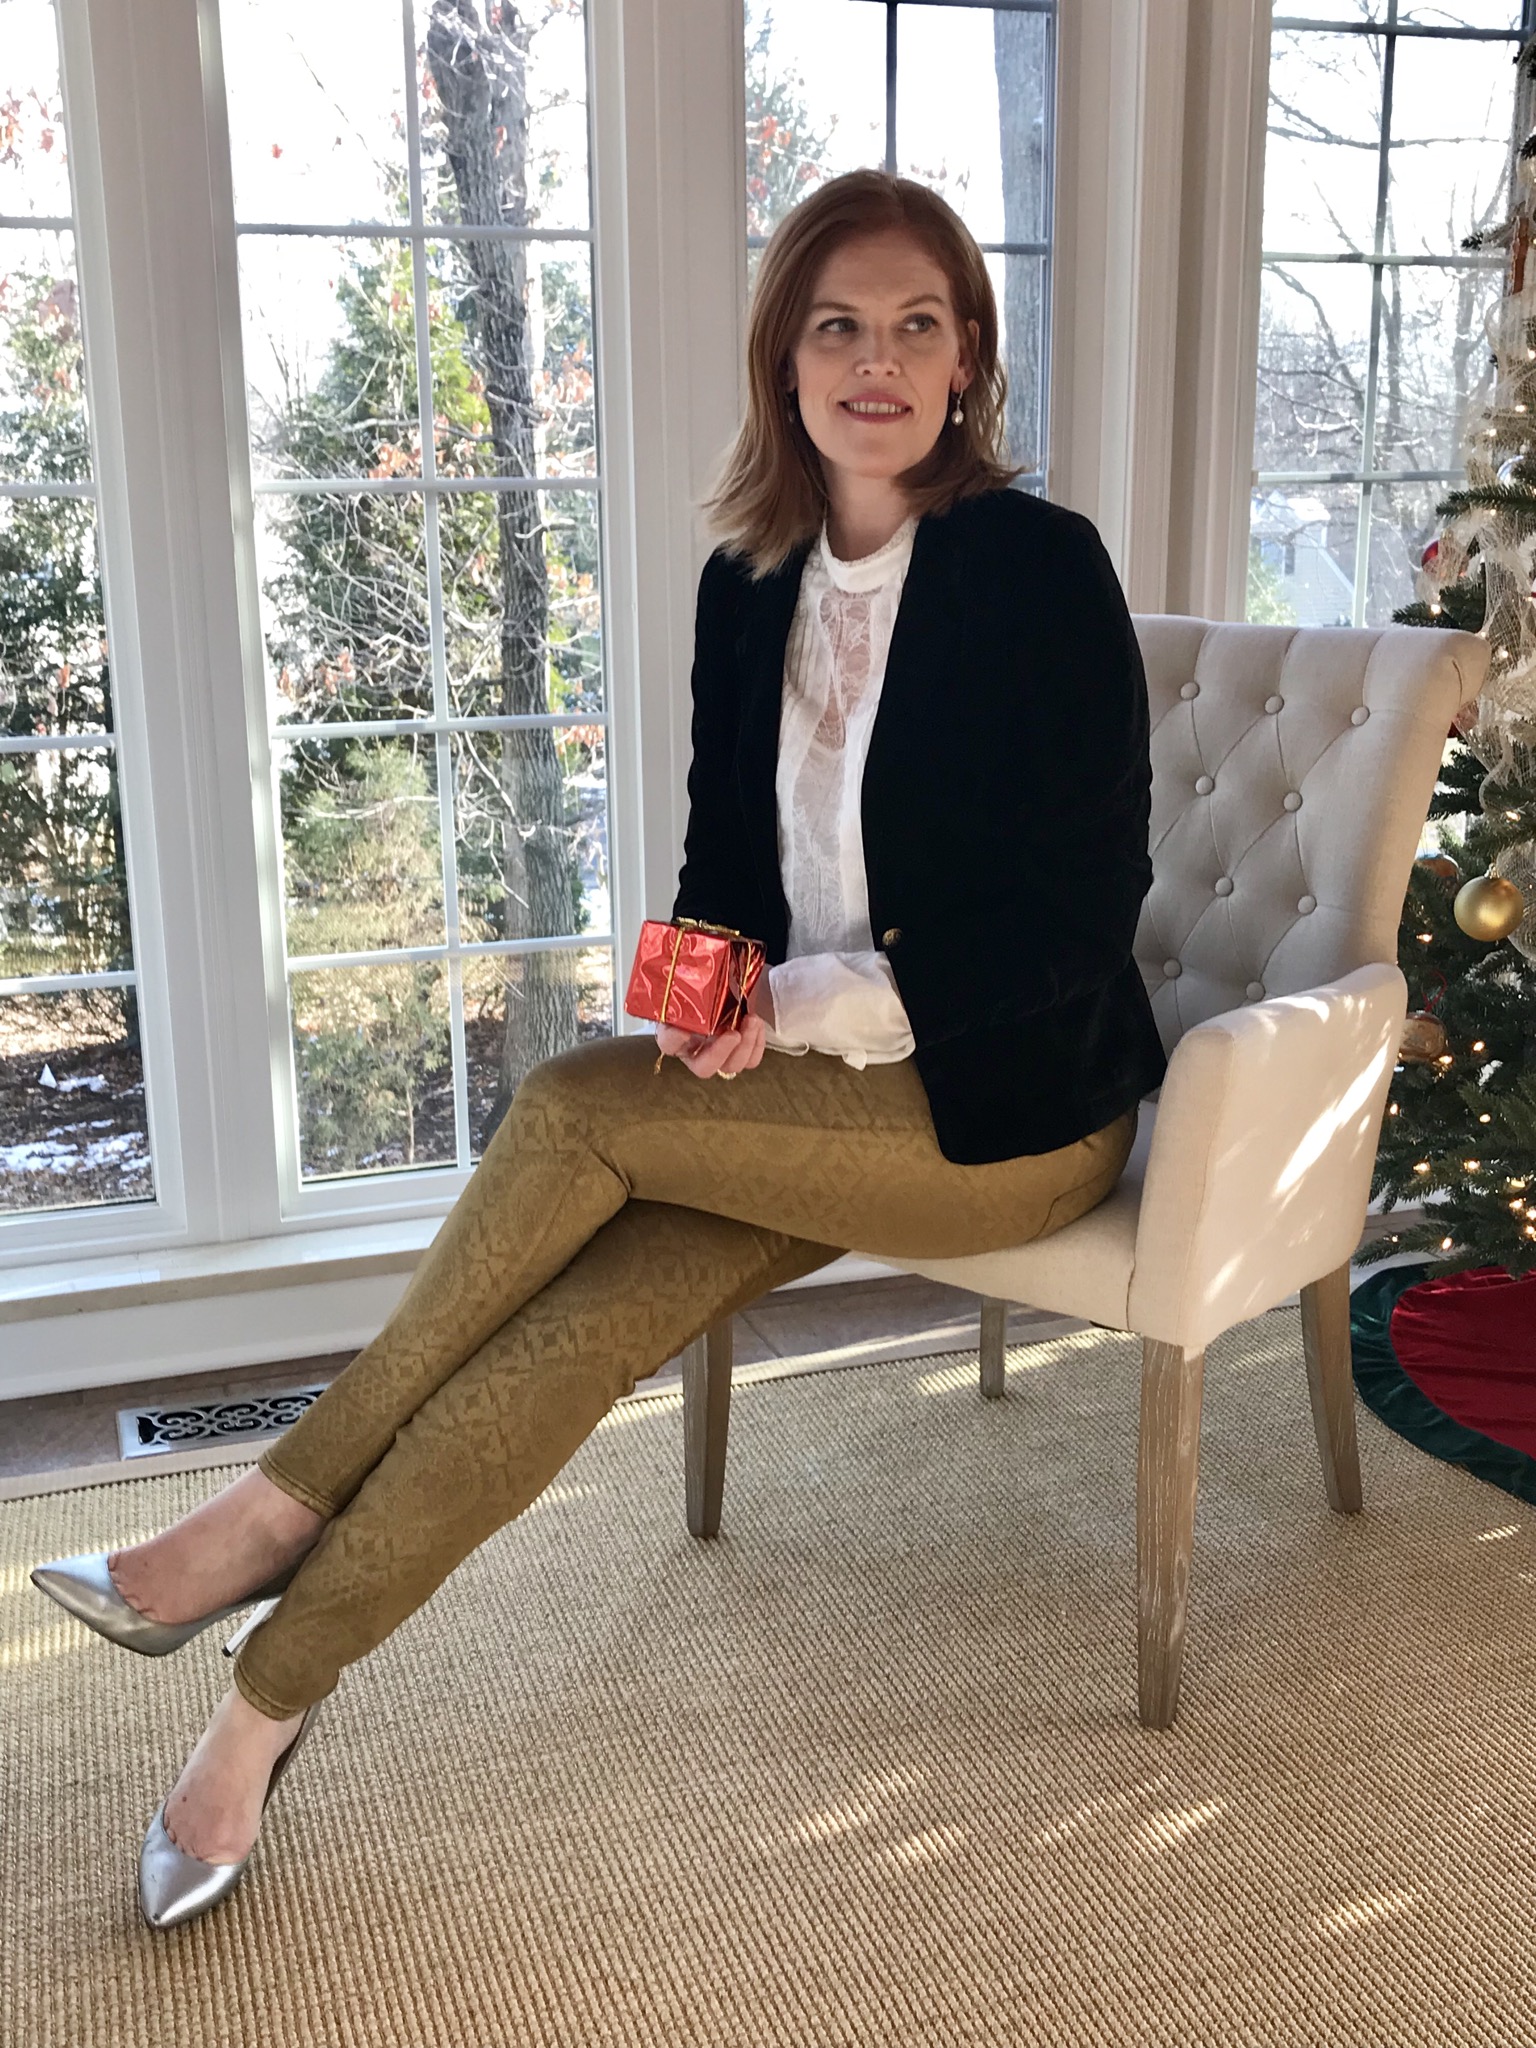 French Holiday Chic Look & Our Christmas Tradition